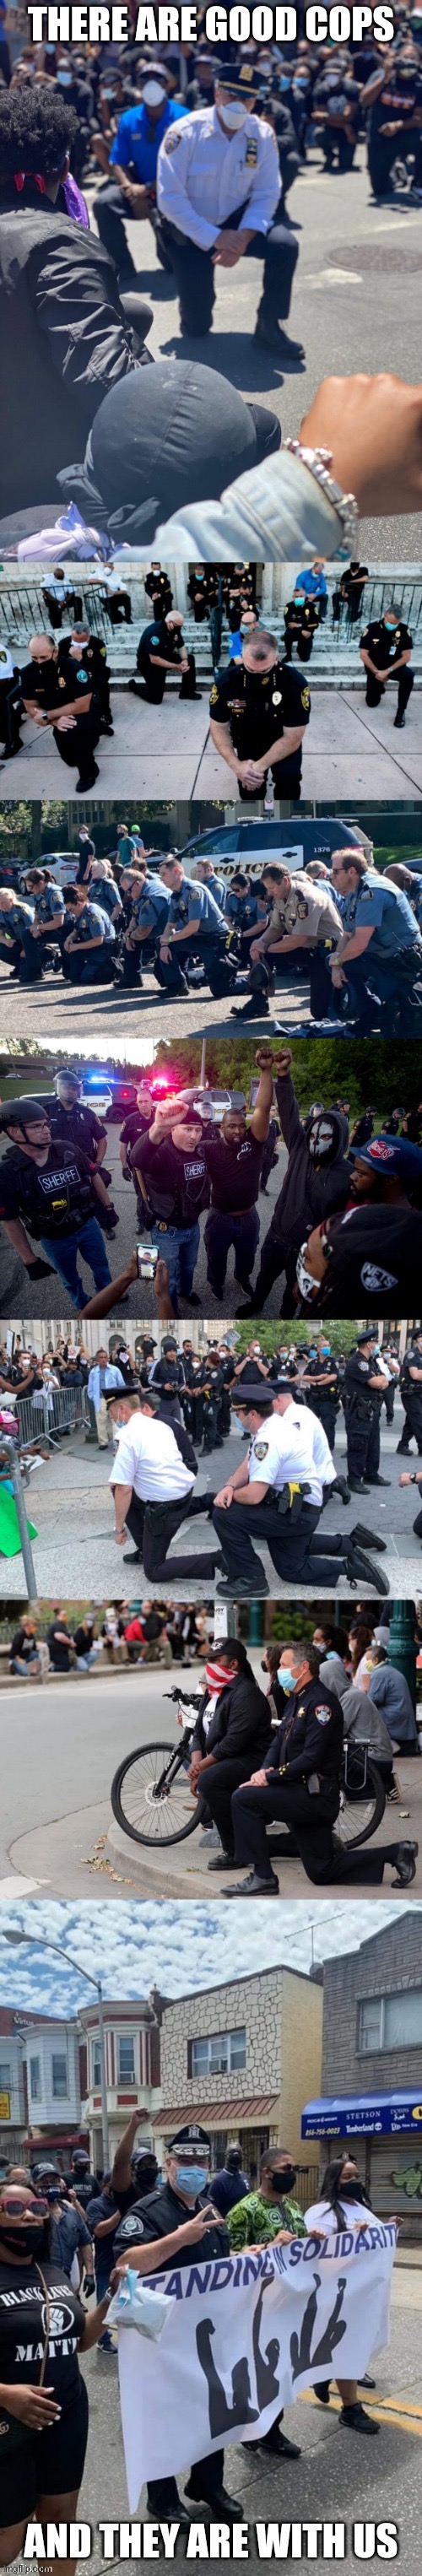 When they say those who join anti-police brutality protests are full of hate and the real issue. Guess who else is joining? | image tagged in police,police brutality,protest,protesters,solidarity,conservative logic | made w/ Imgflip meme maker